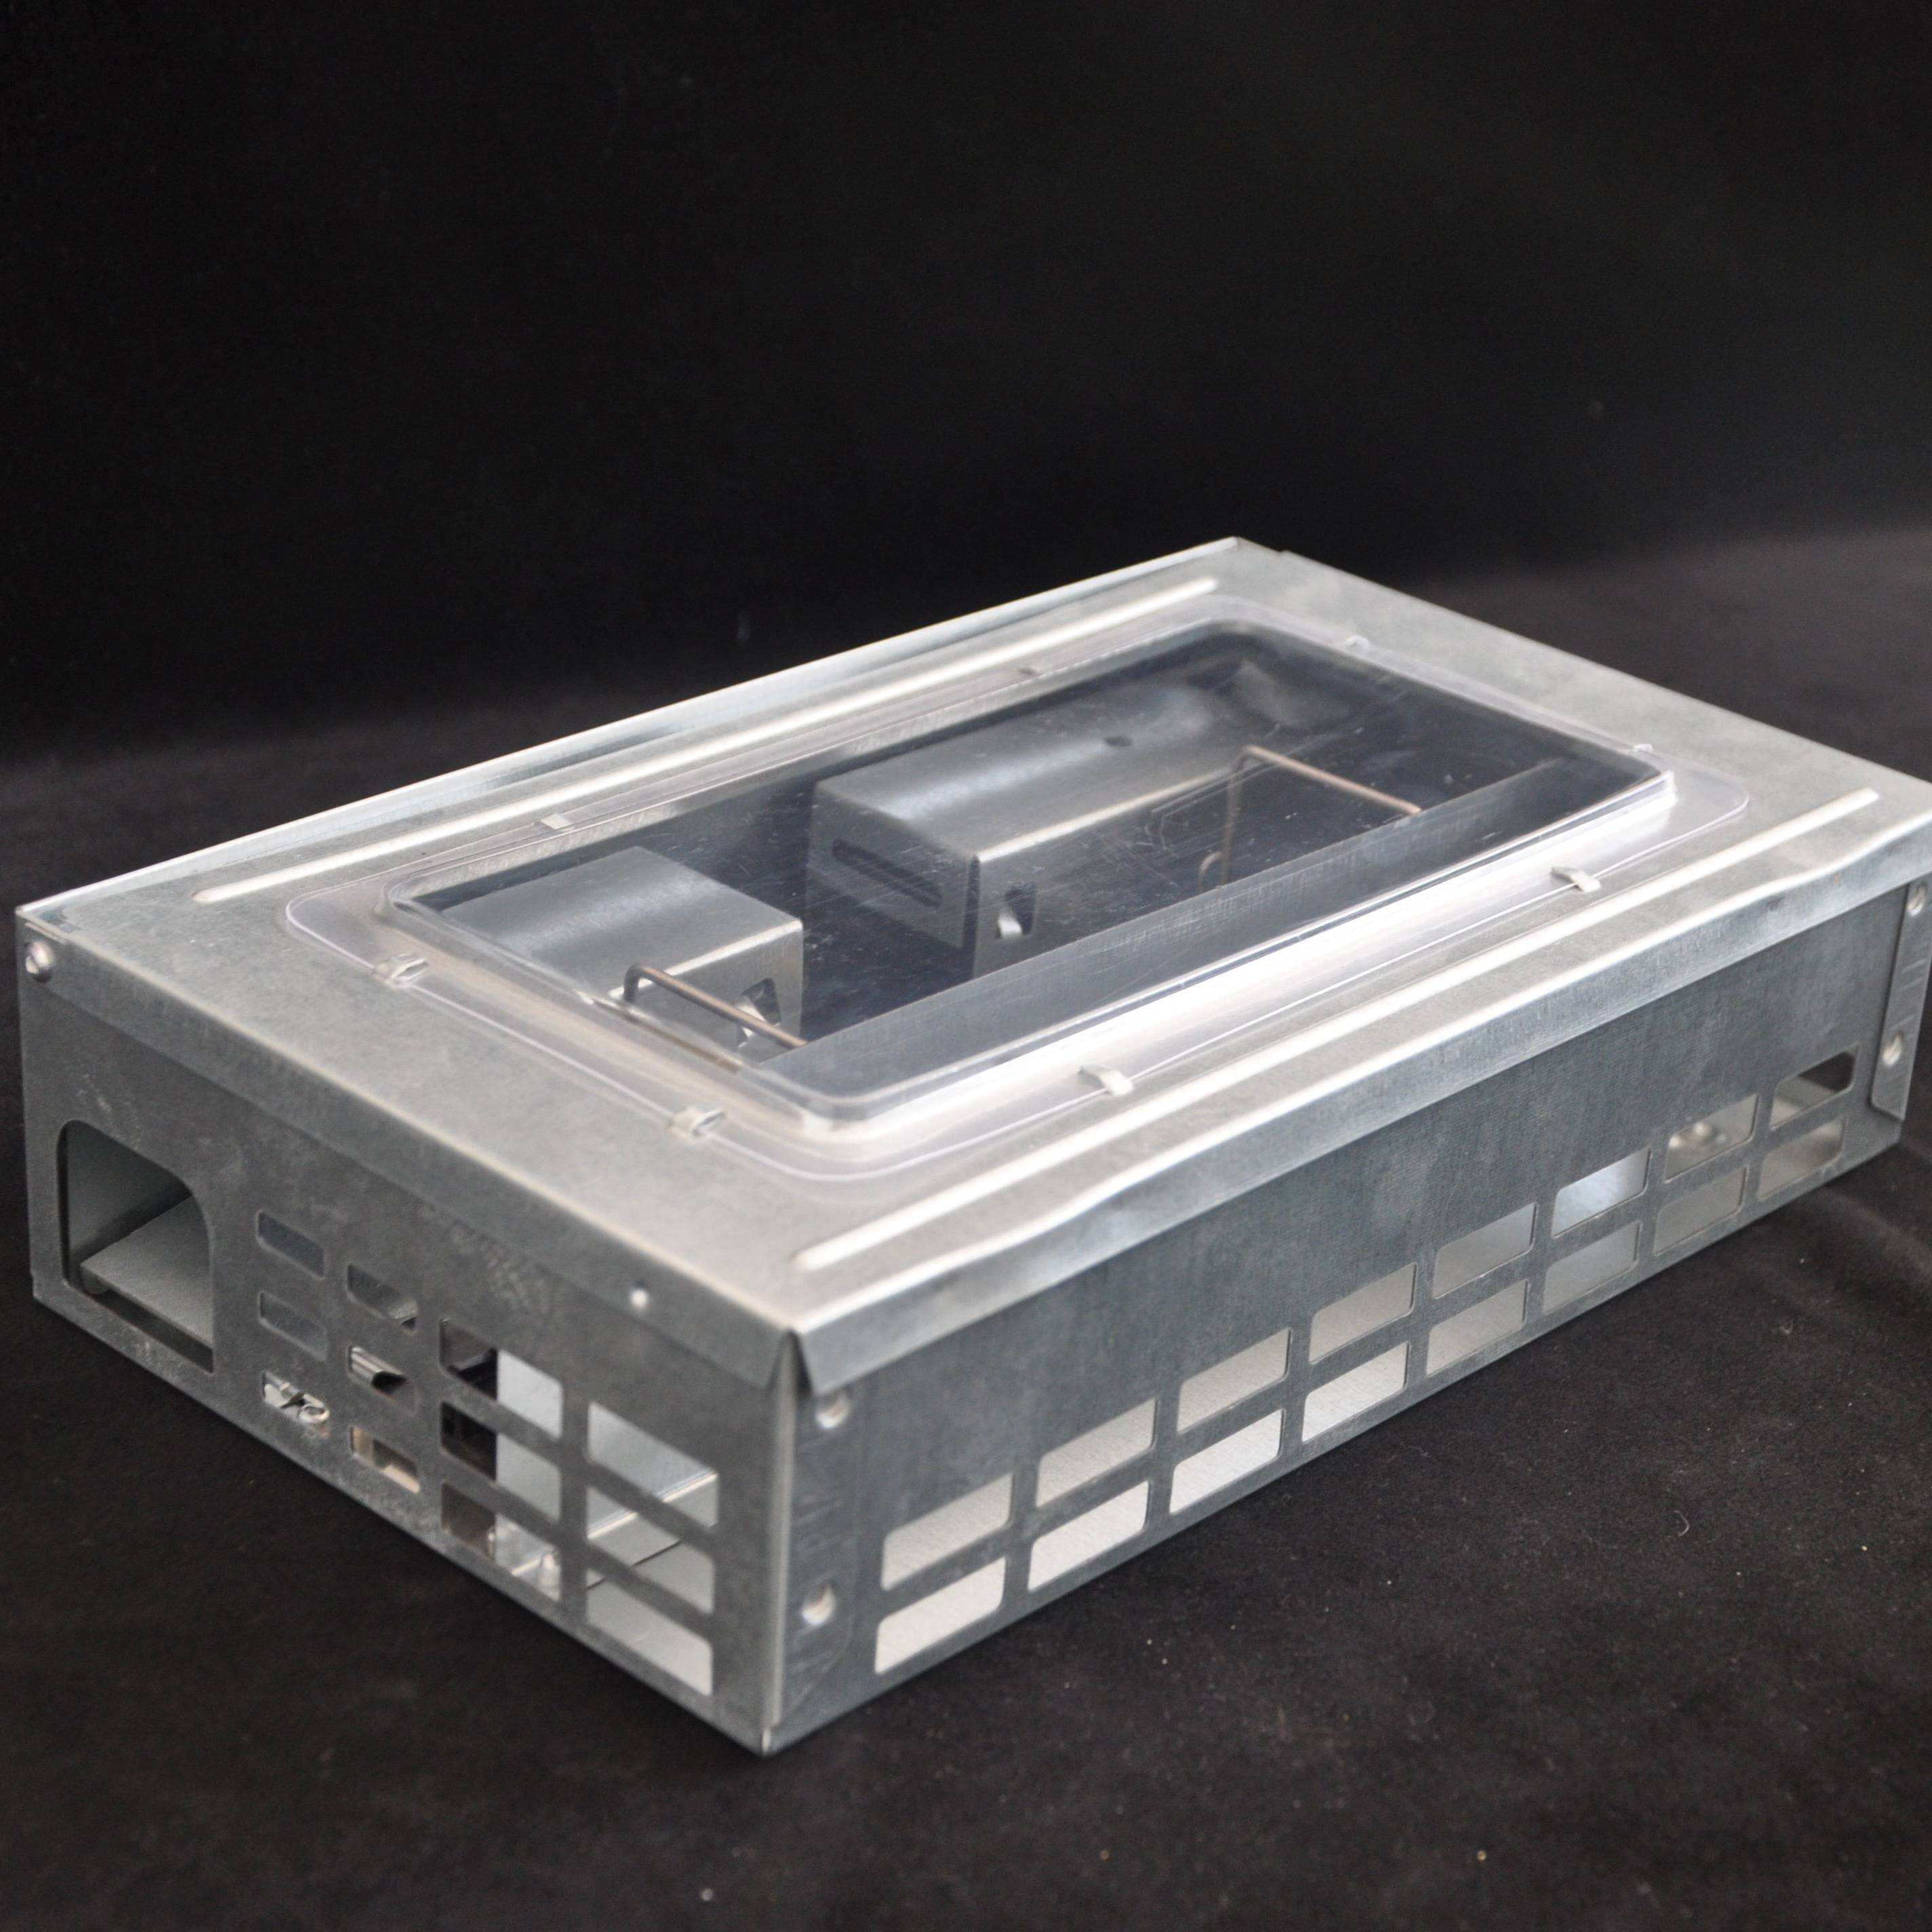 China Wholesale Mouse Bait Station Suppliers, Manufacturers (OEM